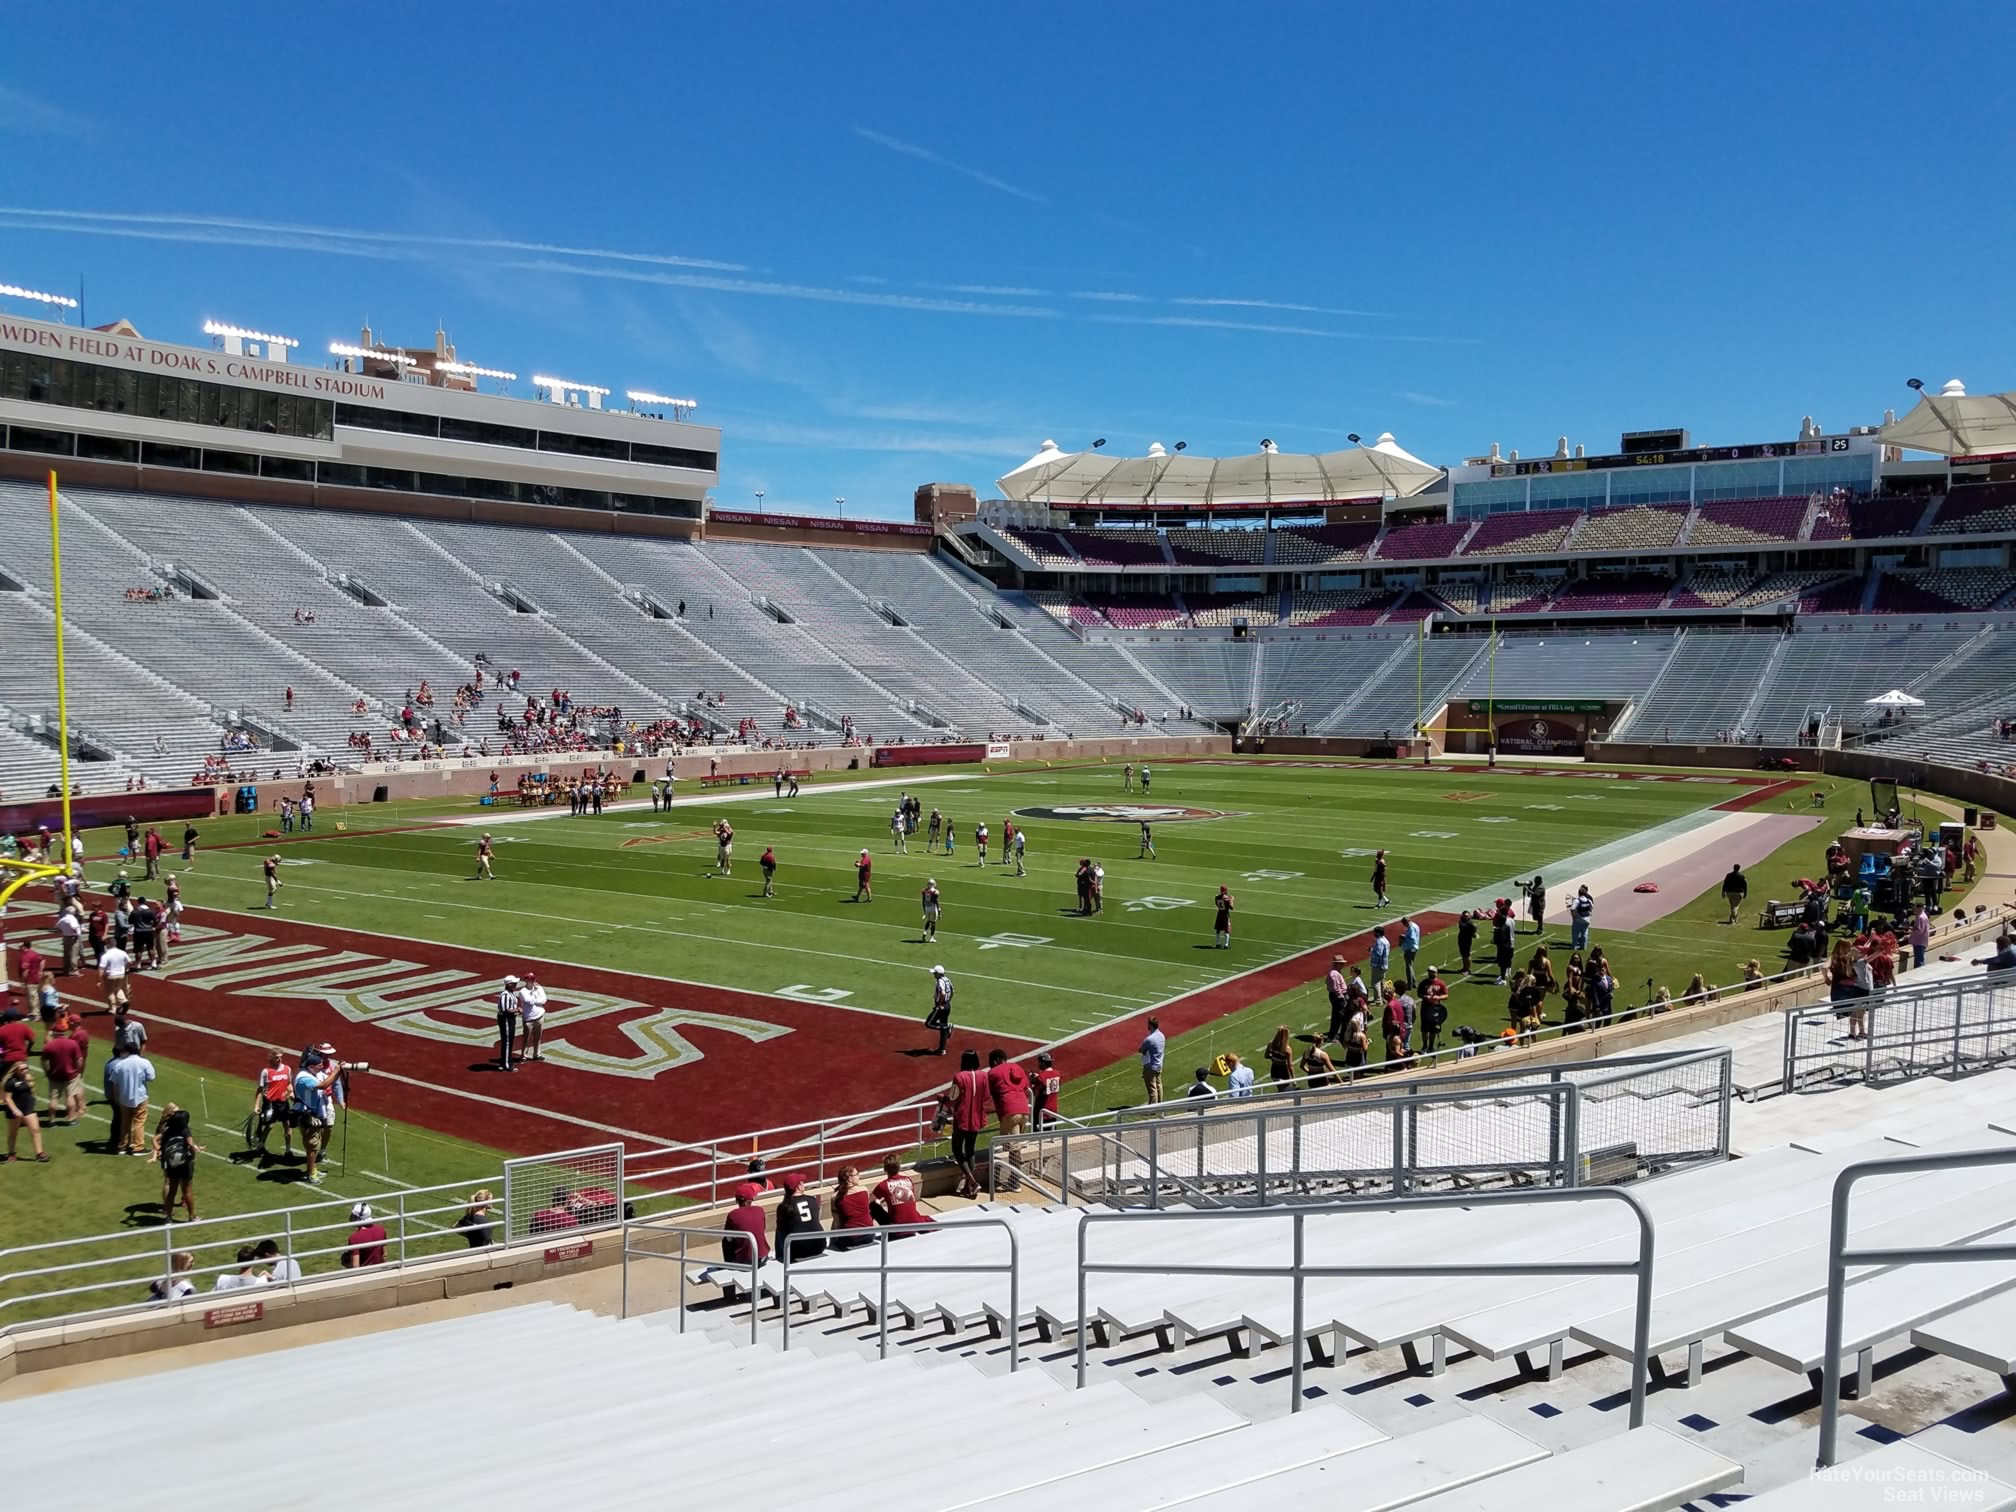 section 39, row 25 seat view  - doak campbell stadium